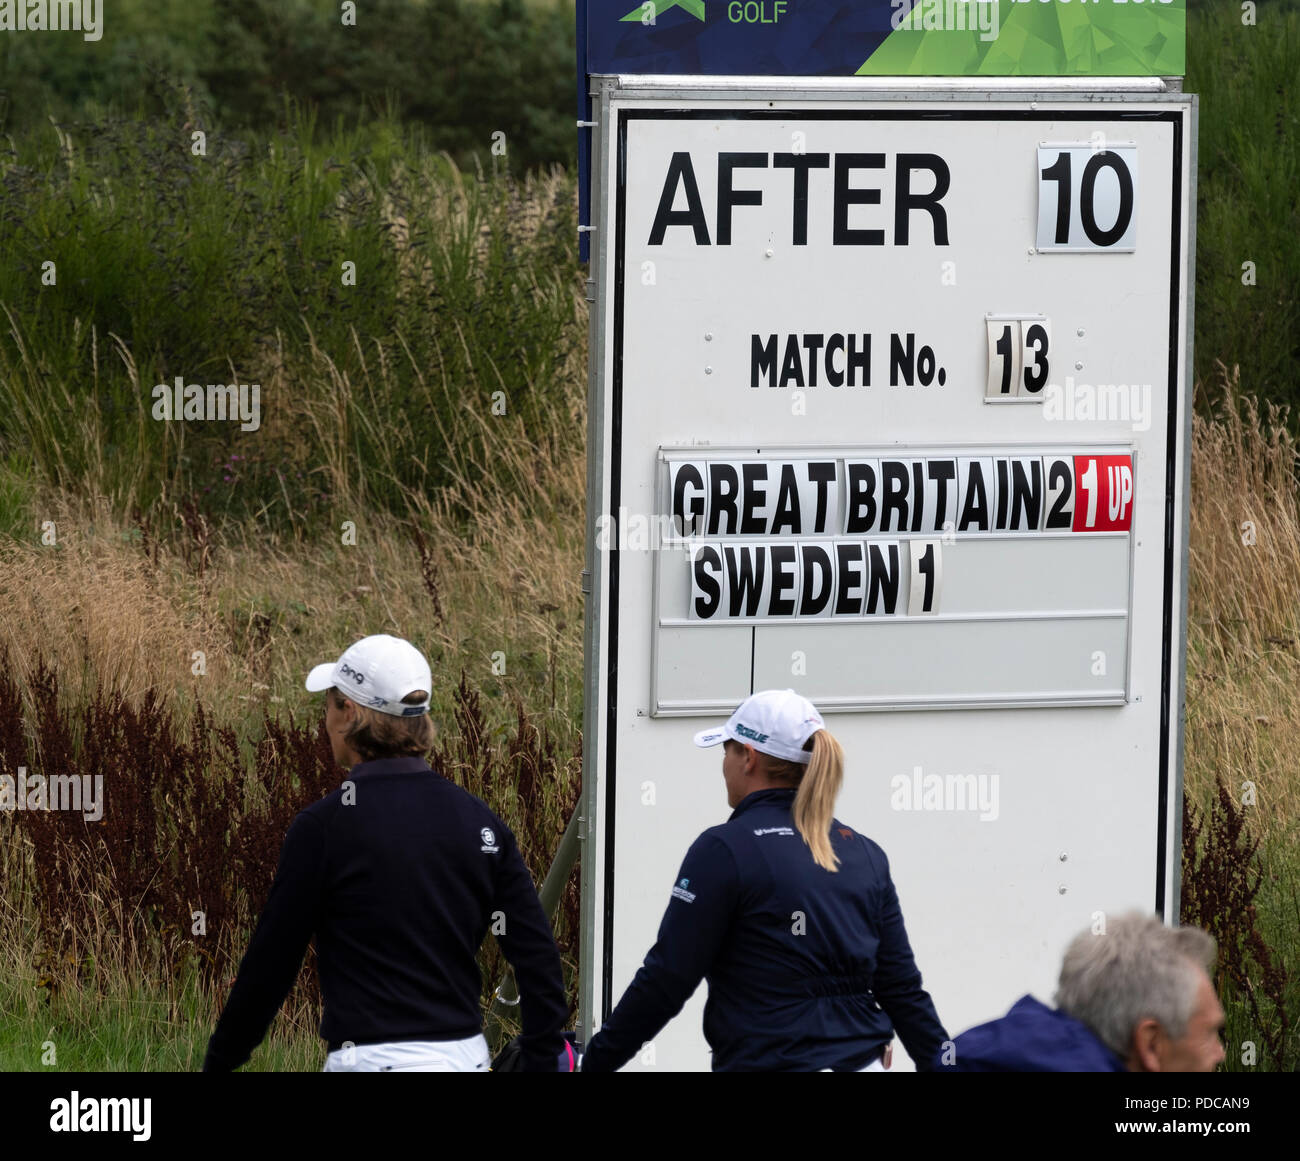 Gleneagles, Scotland, UK; 8 August, 2018.  European Championships 2018. Day one of golf competition at Gleneagles..Men's and Women's Team Championships Round Robin Group Stage - 1st Round. Four Ball Match Play format. Match 13 Great Britain 2 v Sweden 1 Ladies. Catriona Matthew and Holly Clyburn won 3 and 2. Credit: Iain Masterton/Alamy Live News Stock Photo